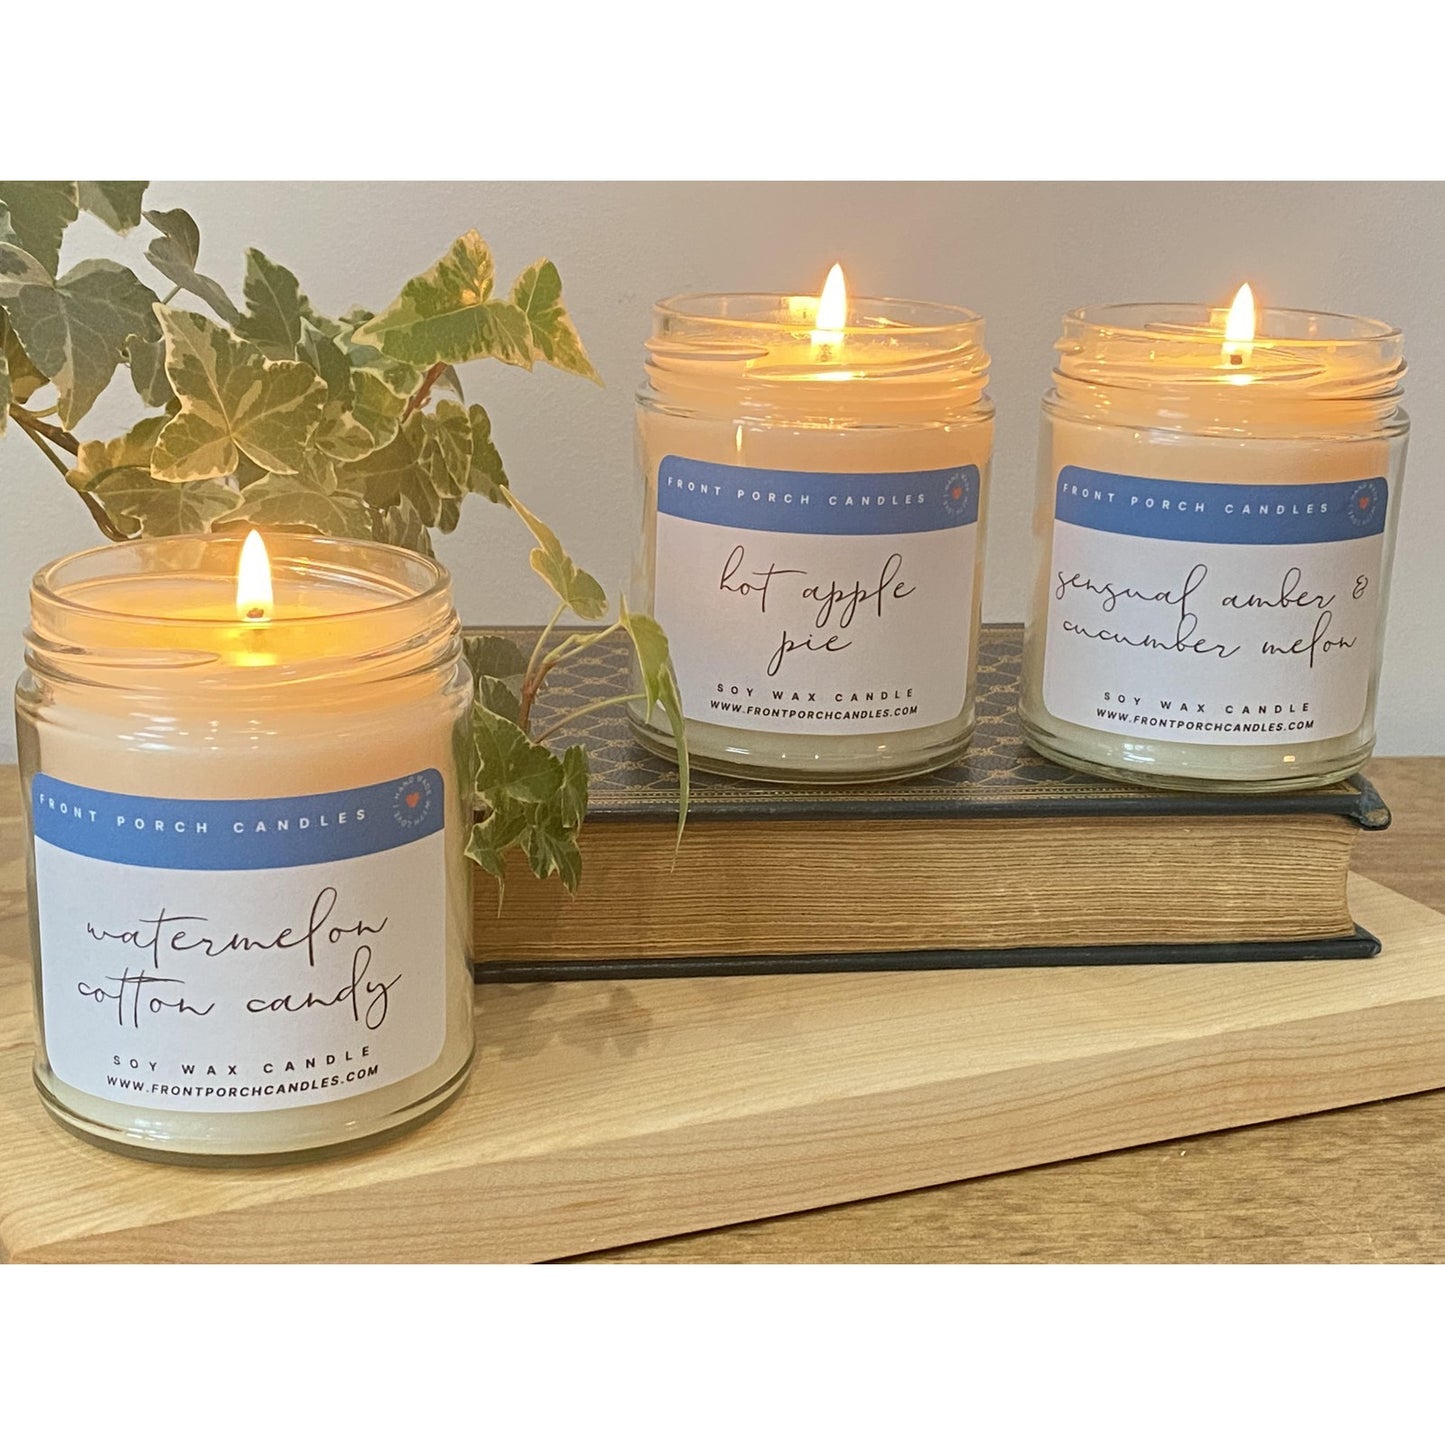 Beach Breeze & Coconut Cream- Blend of Beach Breeze & Coconut Cream Pie.Enjoy our beautiful and aromatic Soy Candles. Made with 100% Soy Wax and our Strong Fragrance Oils (candles may come in contact with other waxes in our facility). The color of the candle will vary in shades of white and yellow. Candles are approx. 8 fluid ounces each.BURNING INSTRUCTIONS:Keep wick centered and trimmed to 1/4" at all times- (never leave unattended and watch flame- if flame is getting higher- extinguish immediately and tr